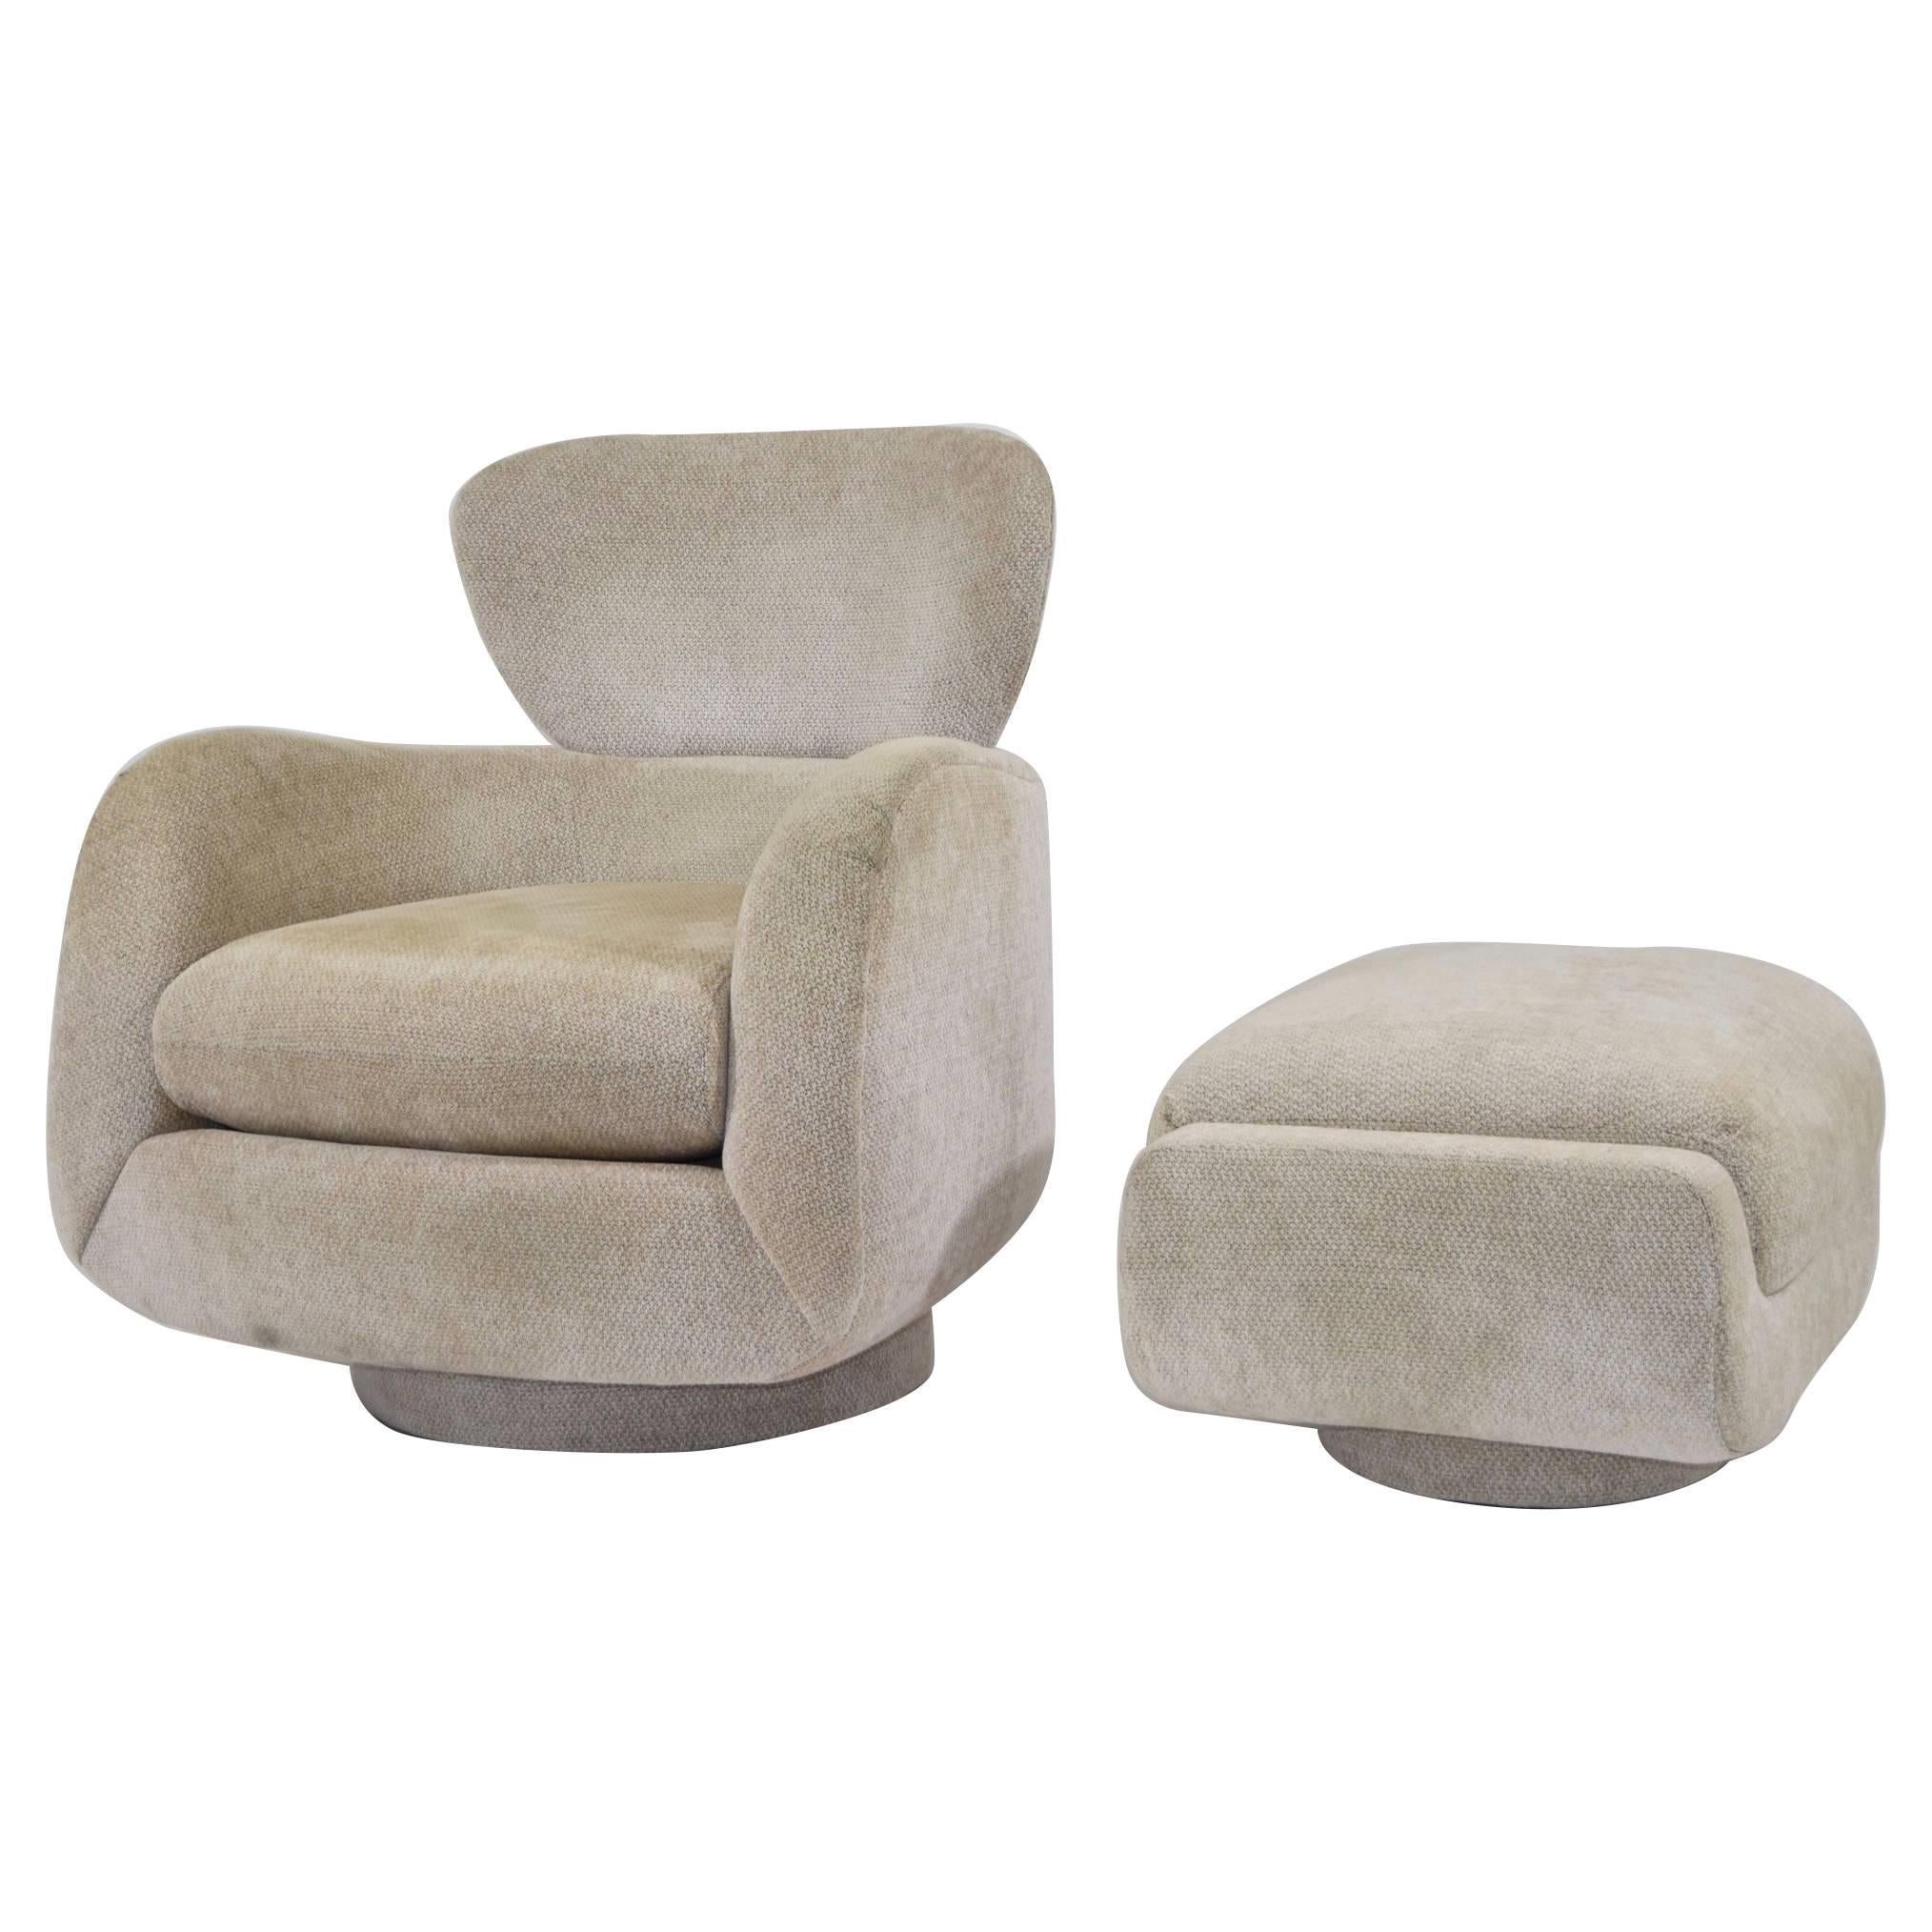 Vladimir Kagan Style Lounge Chair and Ottoman by Directional